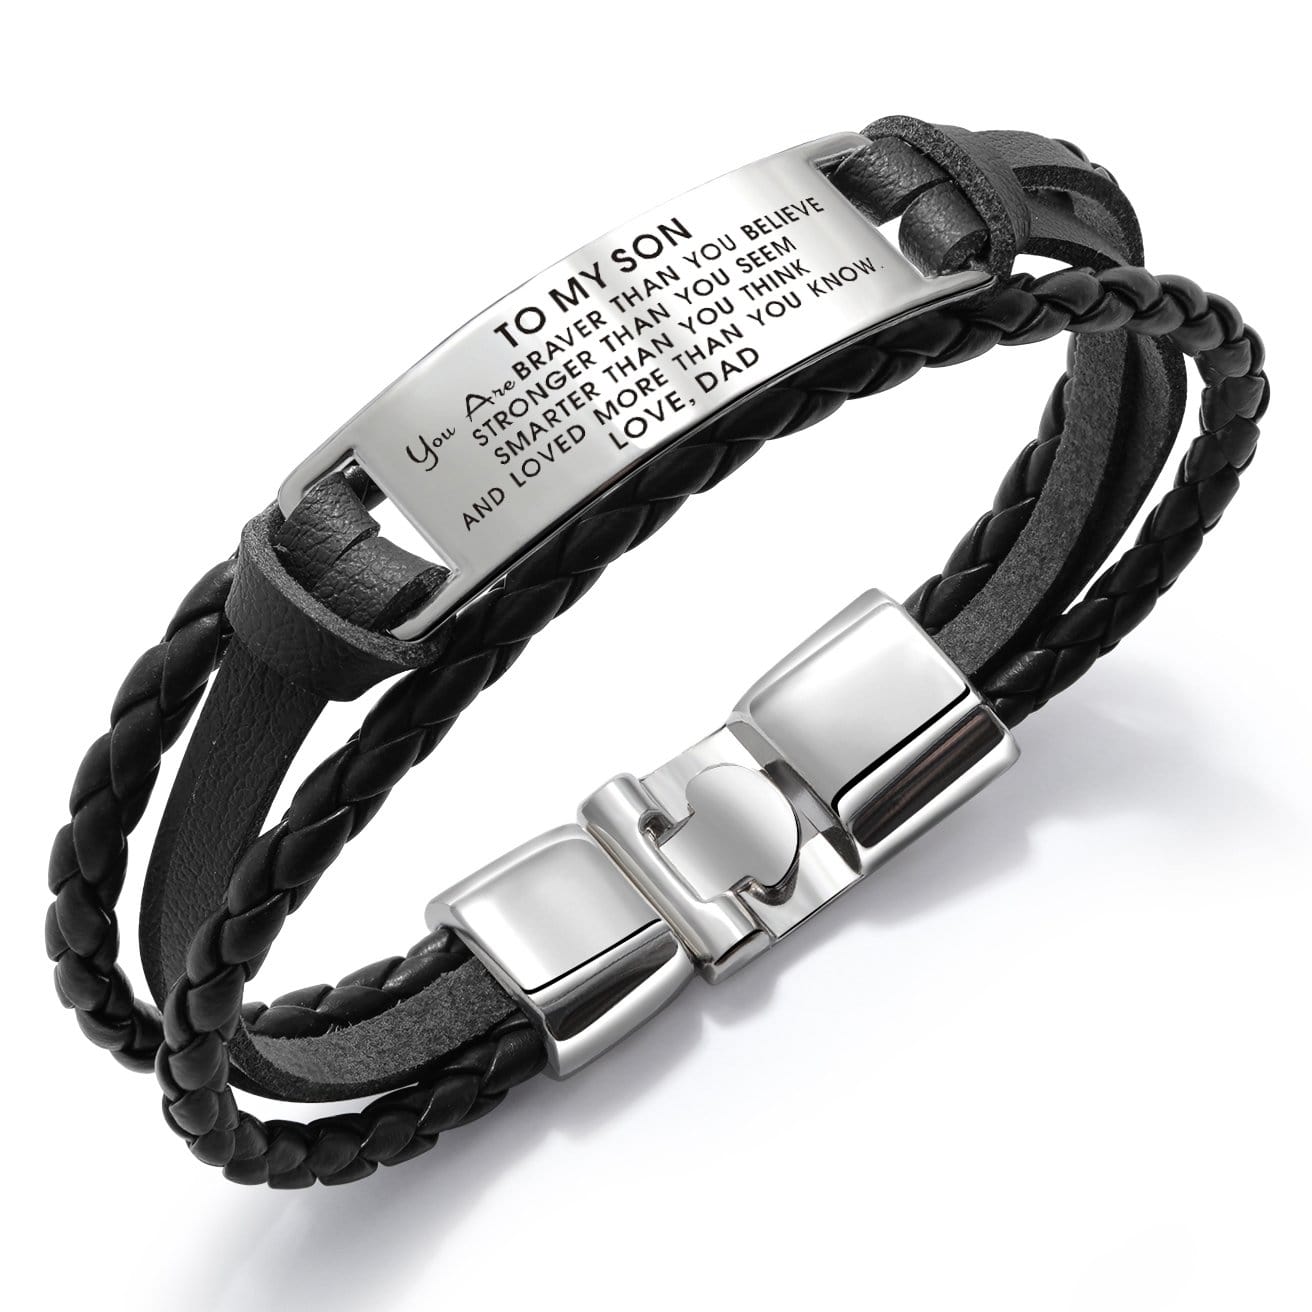 Bracelets Dad To Son - You Are Loved More Than You Know Leather Bracelet Black GiveMe-Gifts